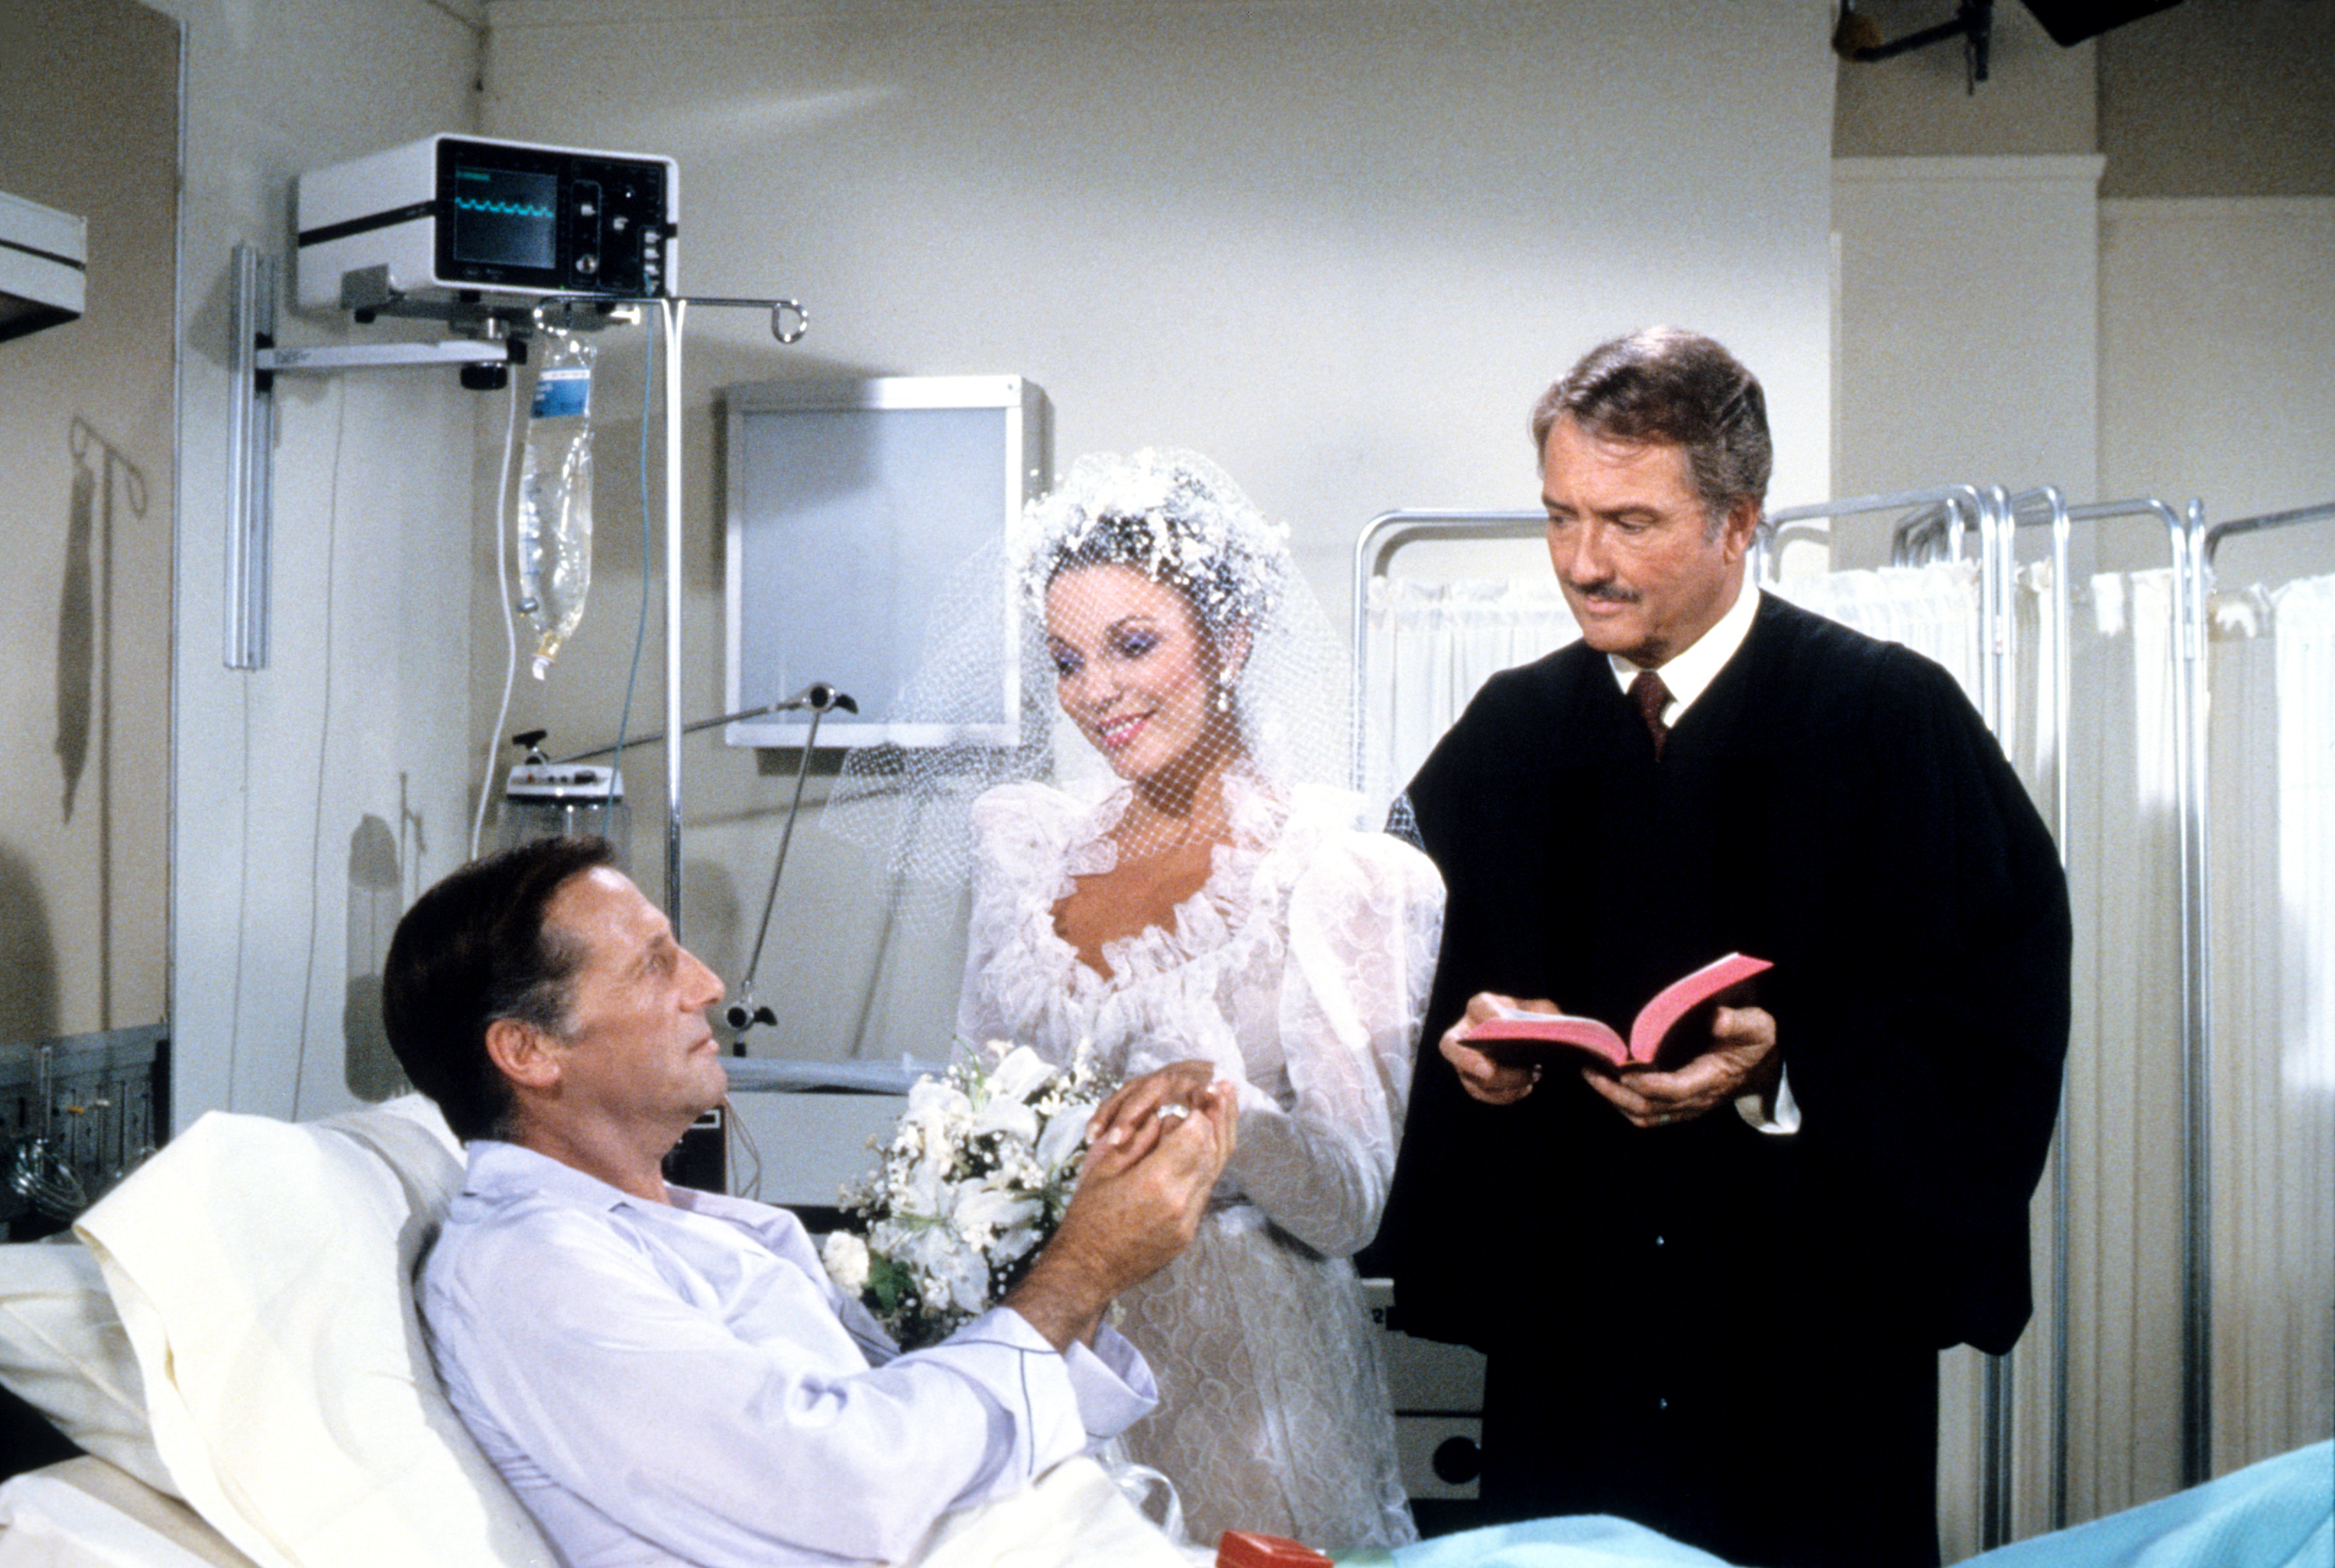 A bride in a full gown and a man in a suit stand by a patient in a hospital bed, officiating a wedding